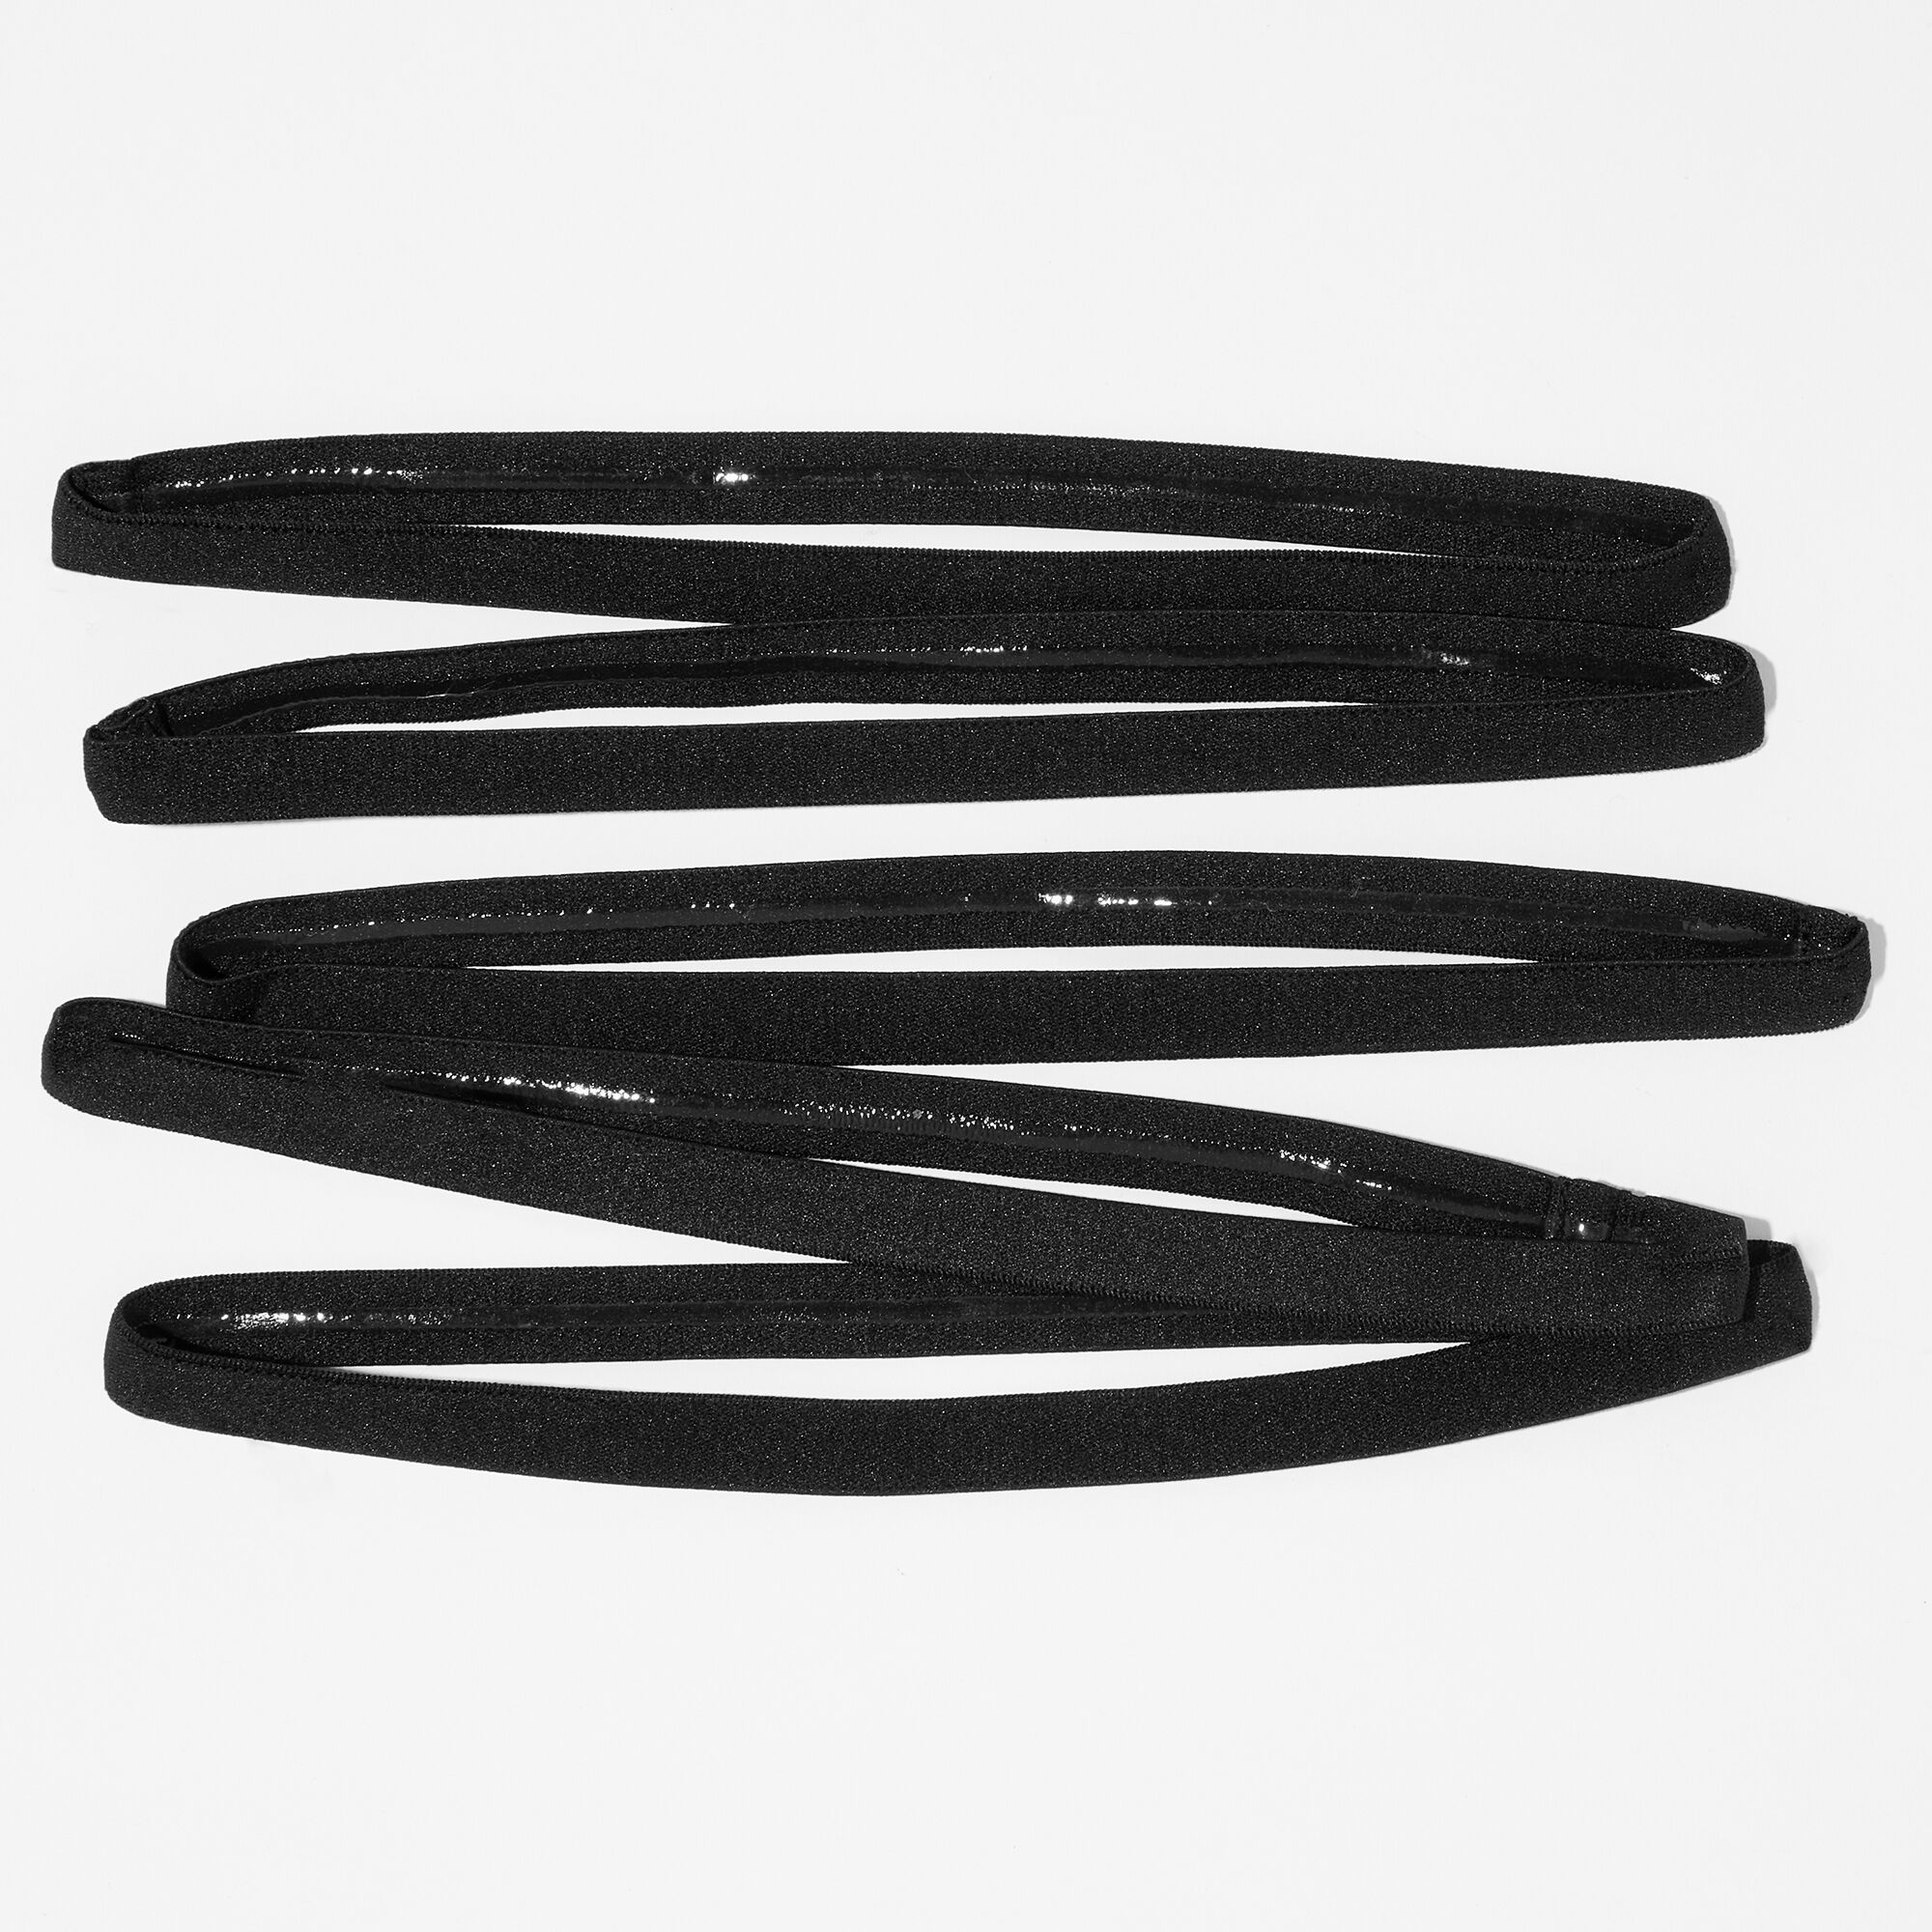 View Claires Narrow Band Sport Headwraps 5 Pack Black information